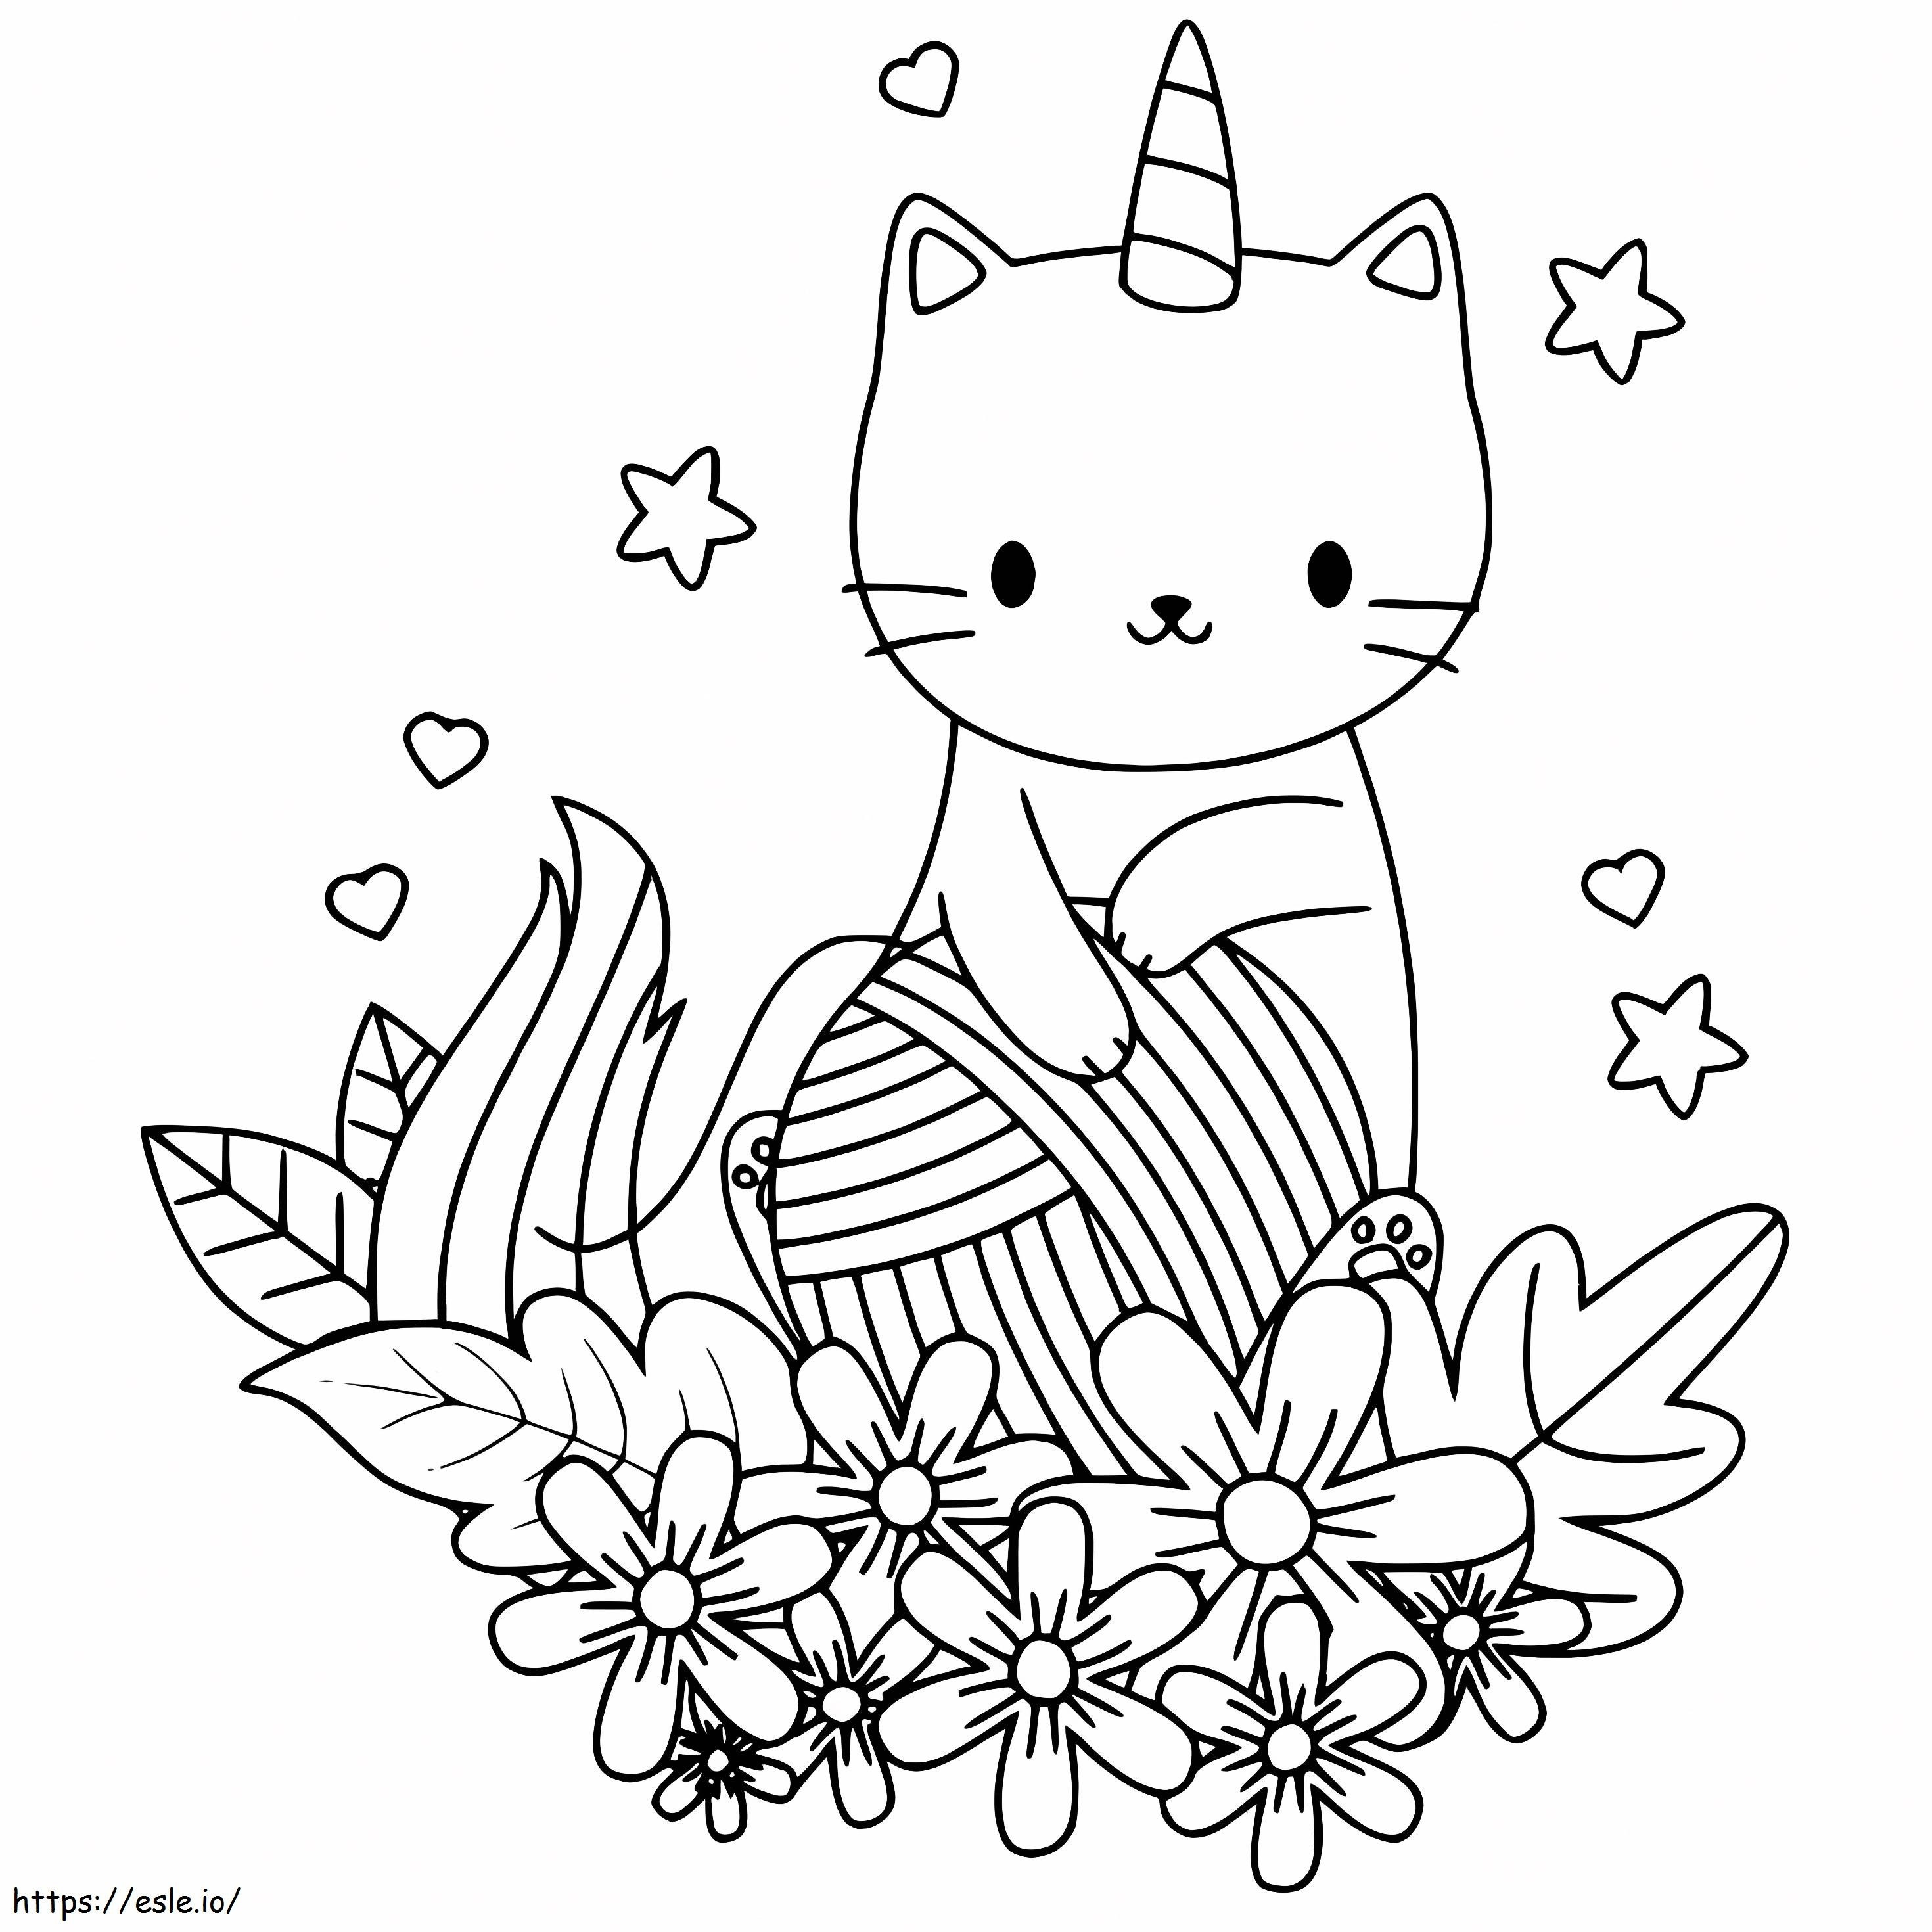 Unicorn Cat With Flowers coloring page